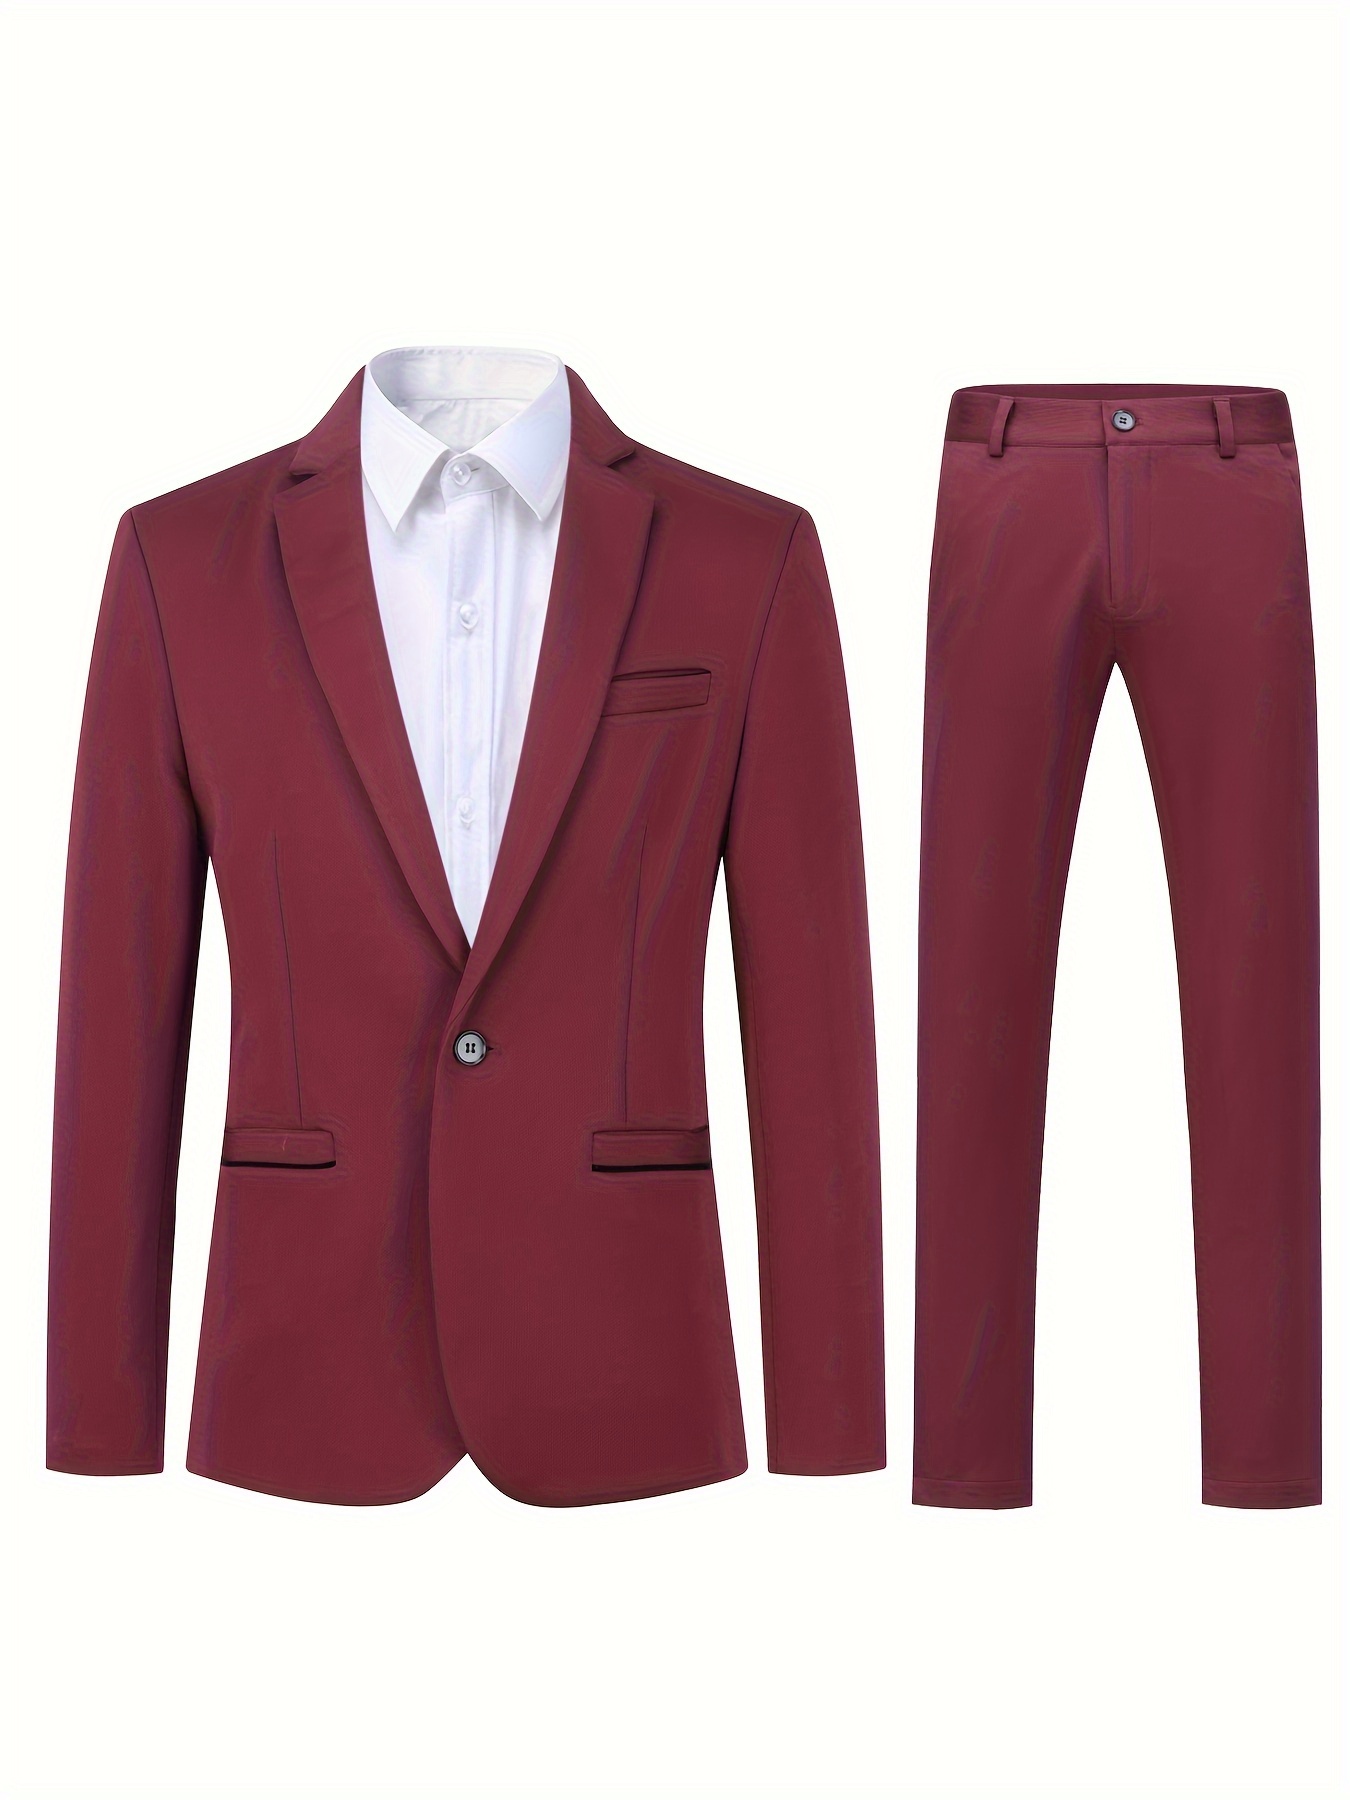 Spring Red Trouser Suits For Women Wedding Guests Wear Crop Top Business  Formal Tuxedos 2 Piece Office Uniform (Jacket+Pants) - AliExpress